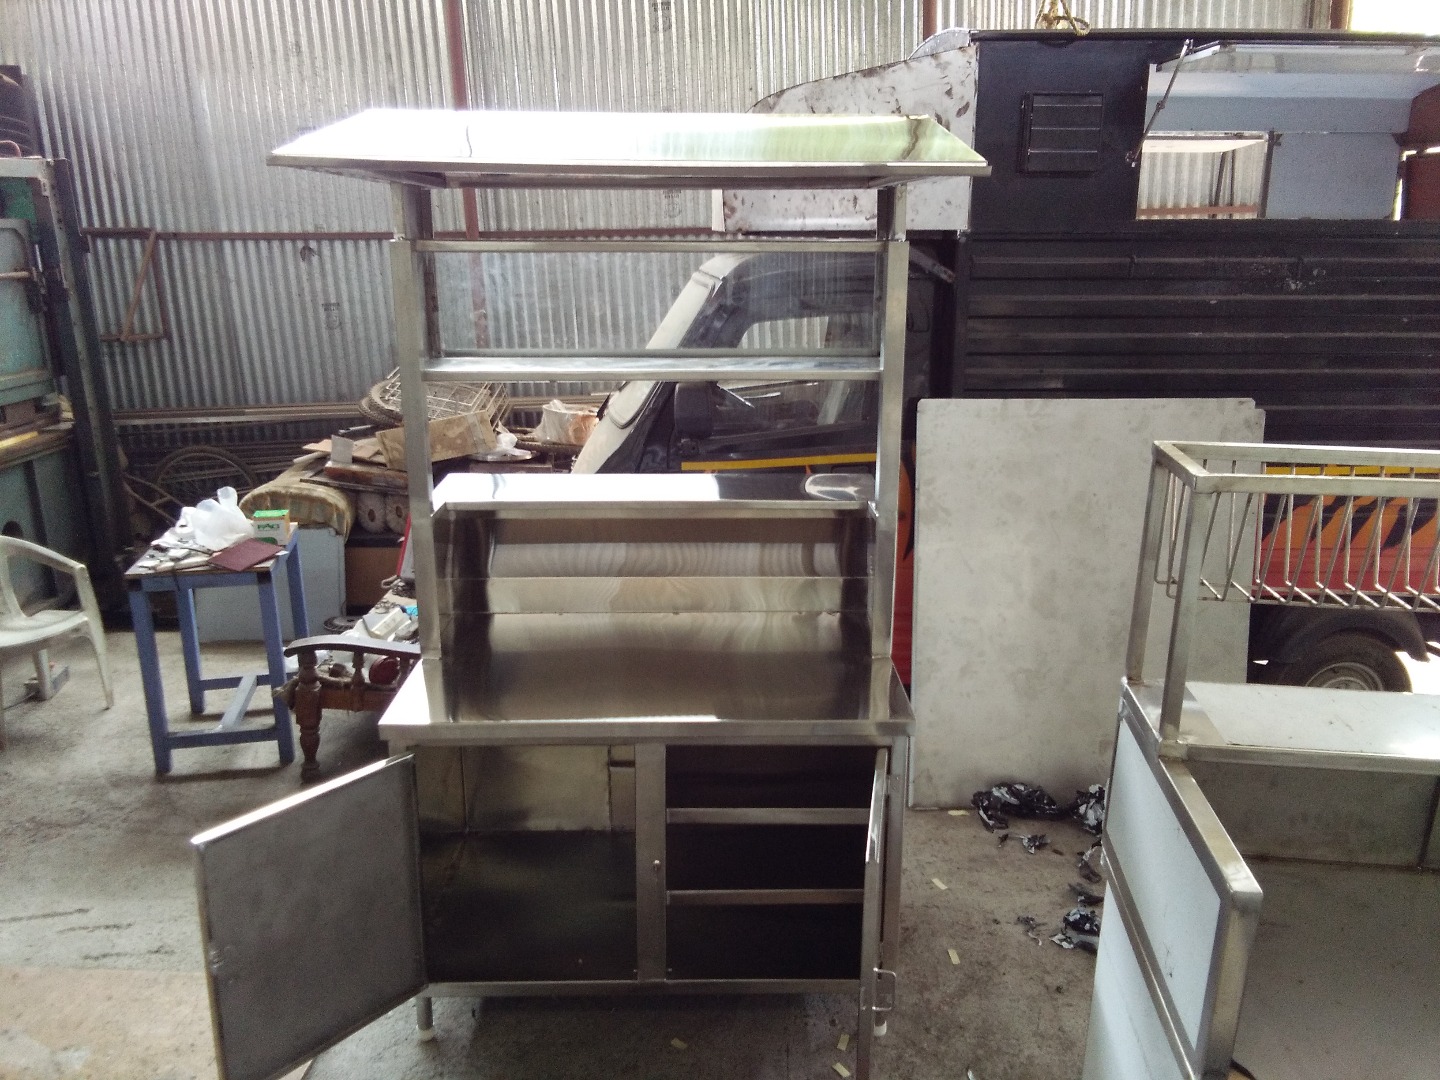 Fort Enterprises, FAST FOOD COUNTER IN PUNE, FAST FOOD COUNTER MANUFACTURERS IN PUNE, FAST FOOD COUNTERS IN PUNE, FAST FOOD COUNTER DEALERS IN PUNE, FAST FOOD COUNTERS IN PUNE, SS STEEL COUNTER IN PUNE, MANUFACTURERS.